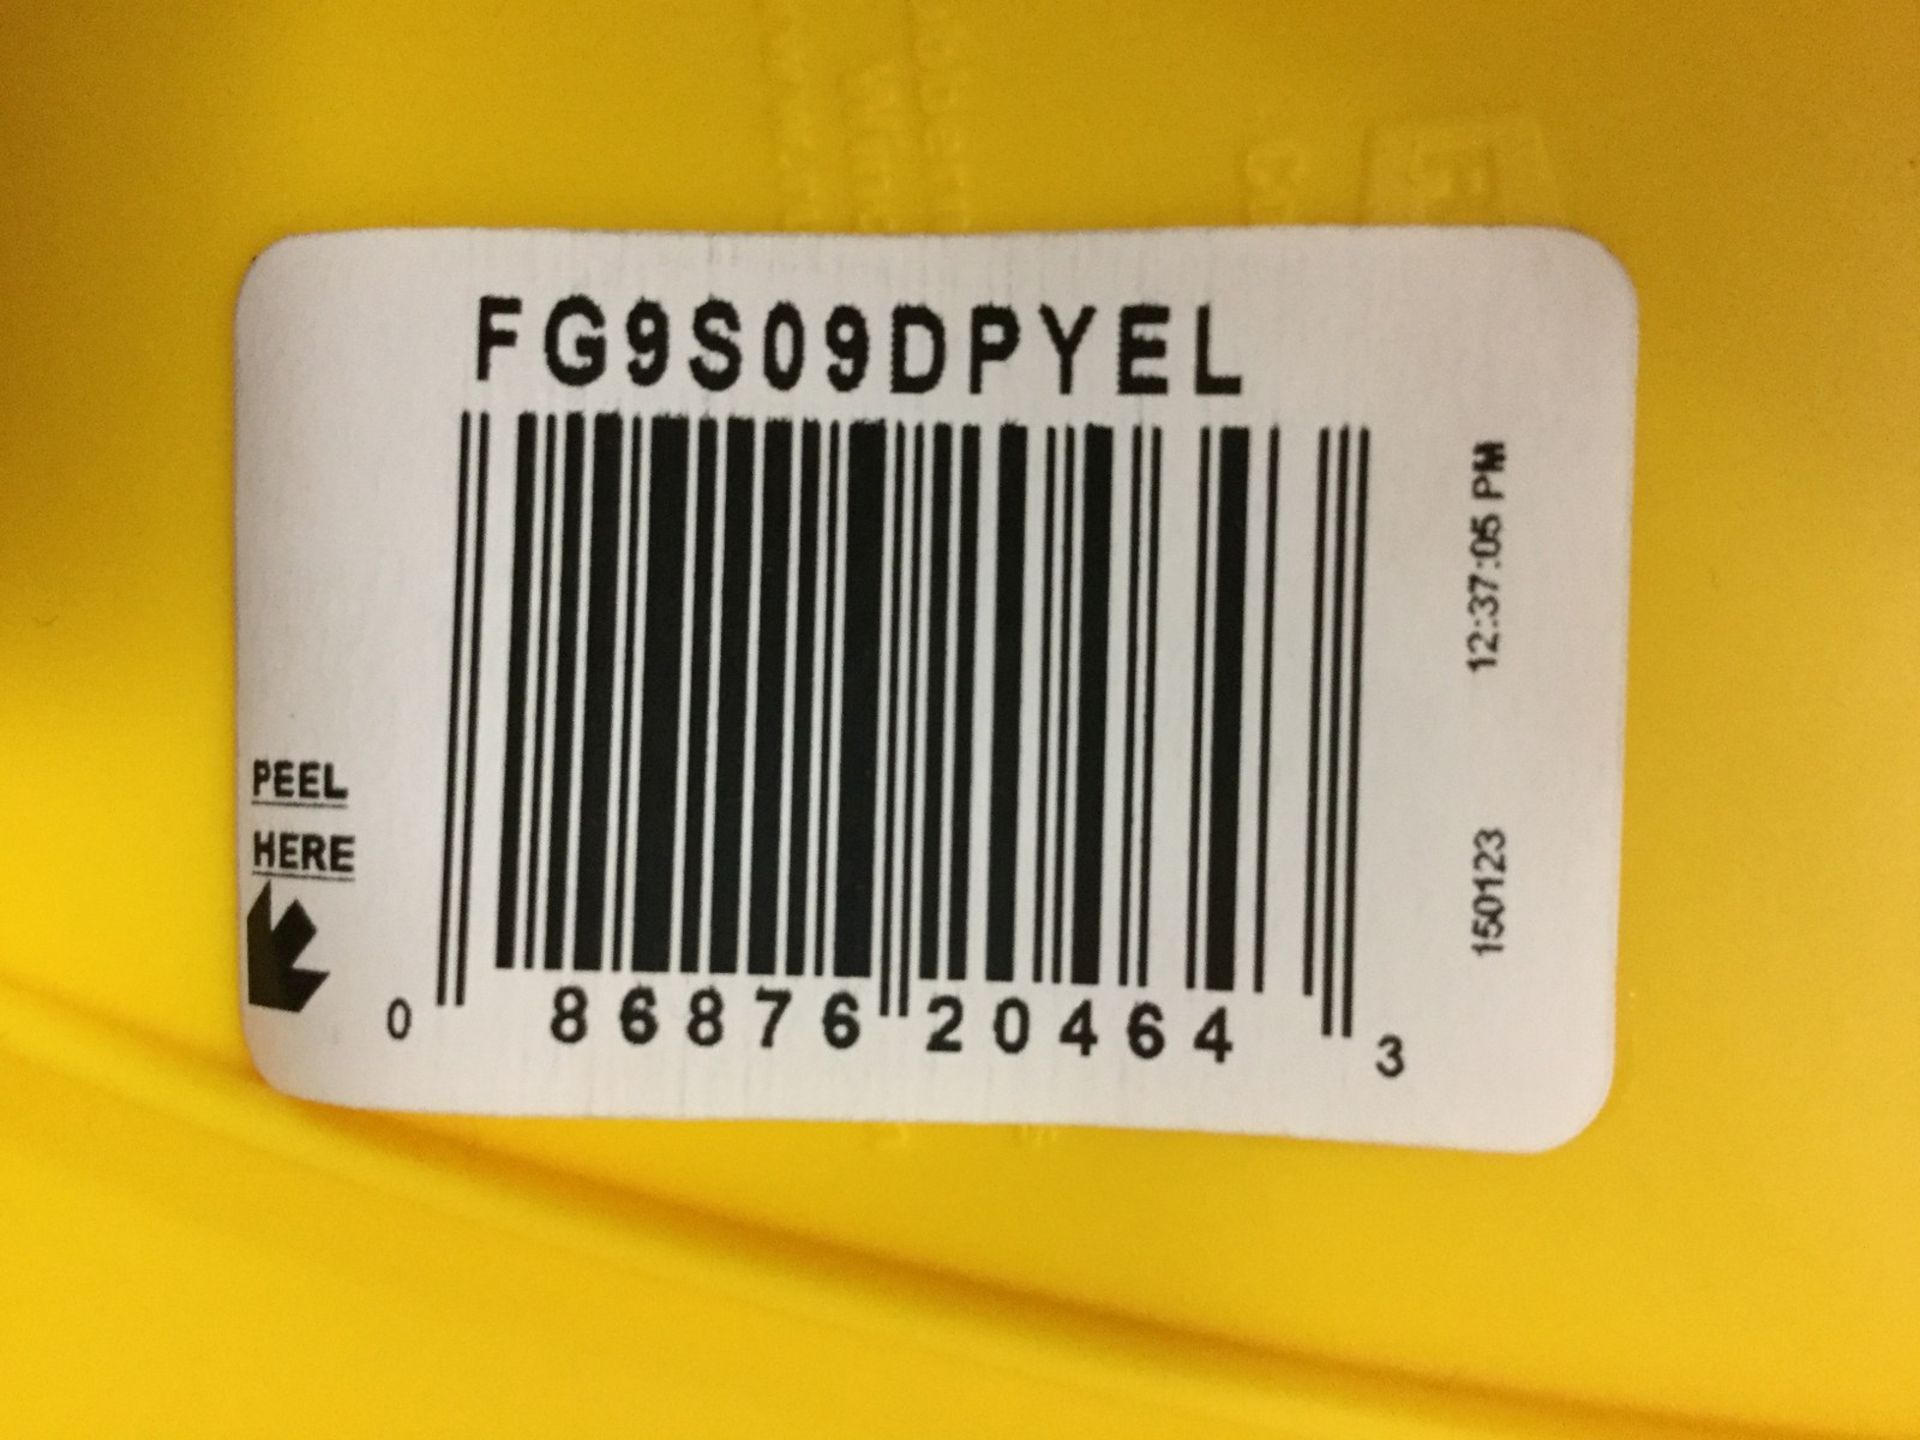 15 X RUBBERMAID - CAUTION SIGNS MODEL # FG9S09DPYEL - Image 2 of 2